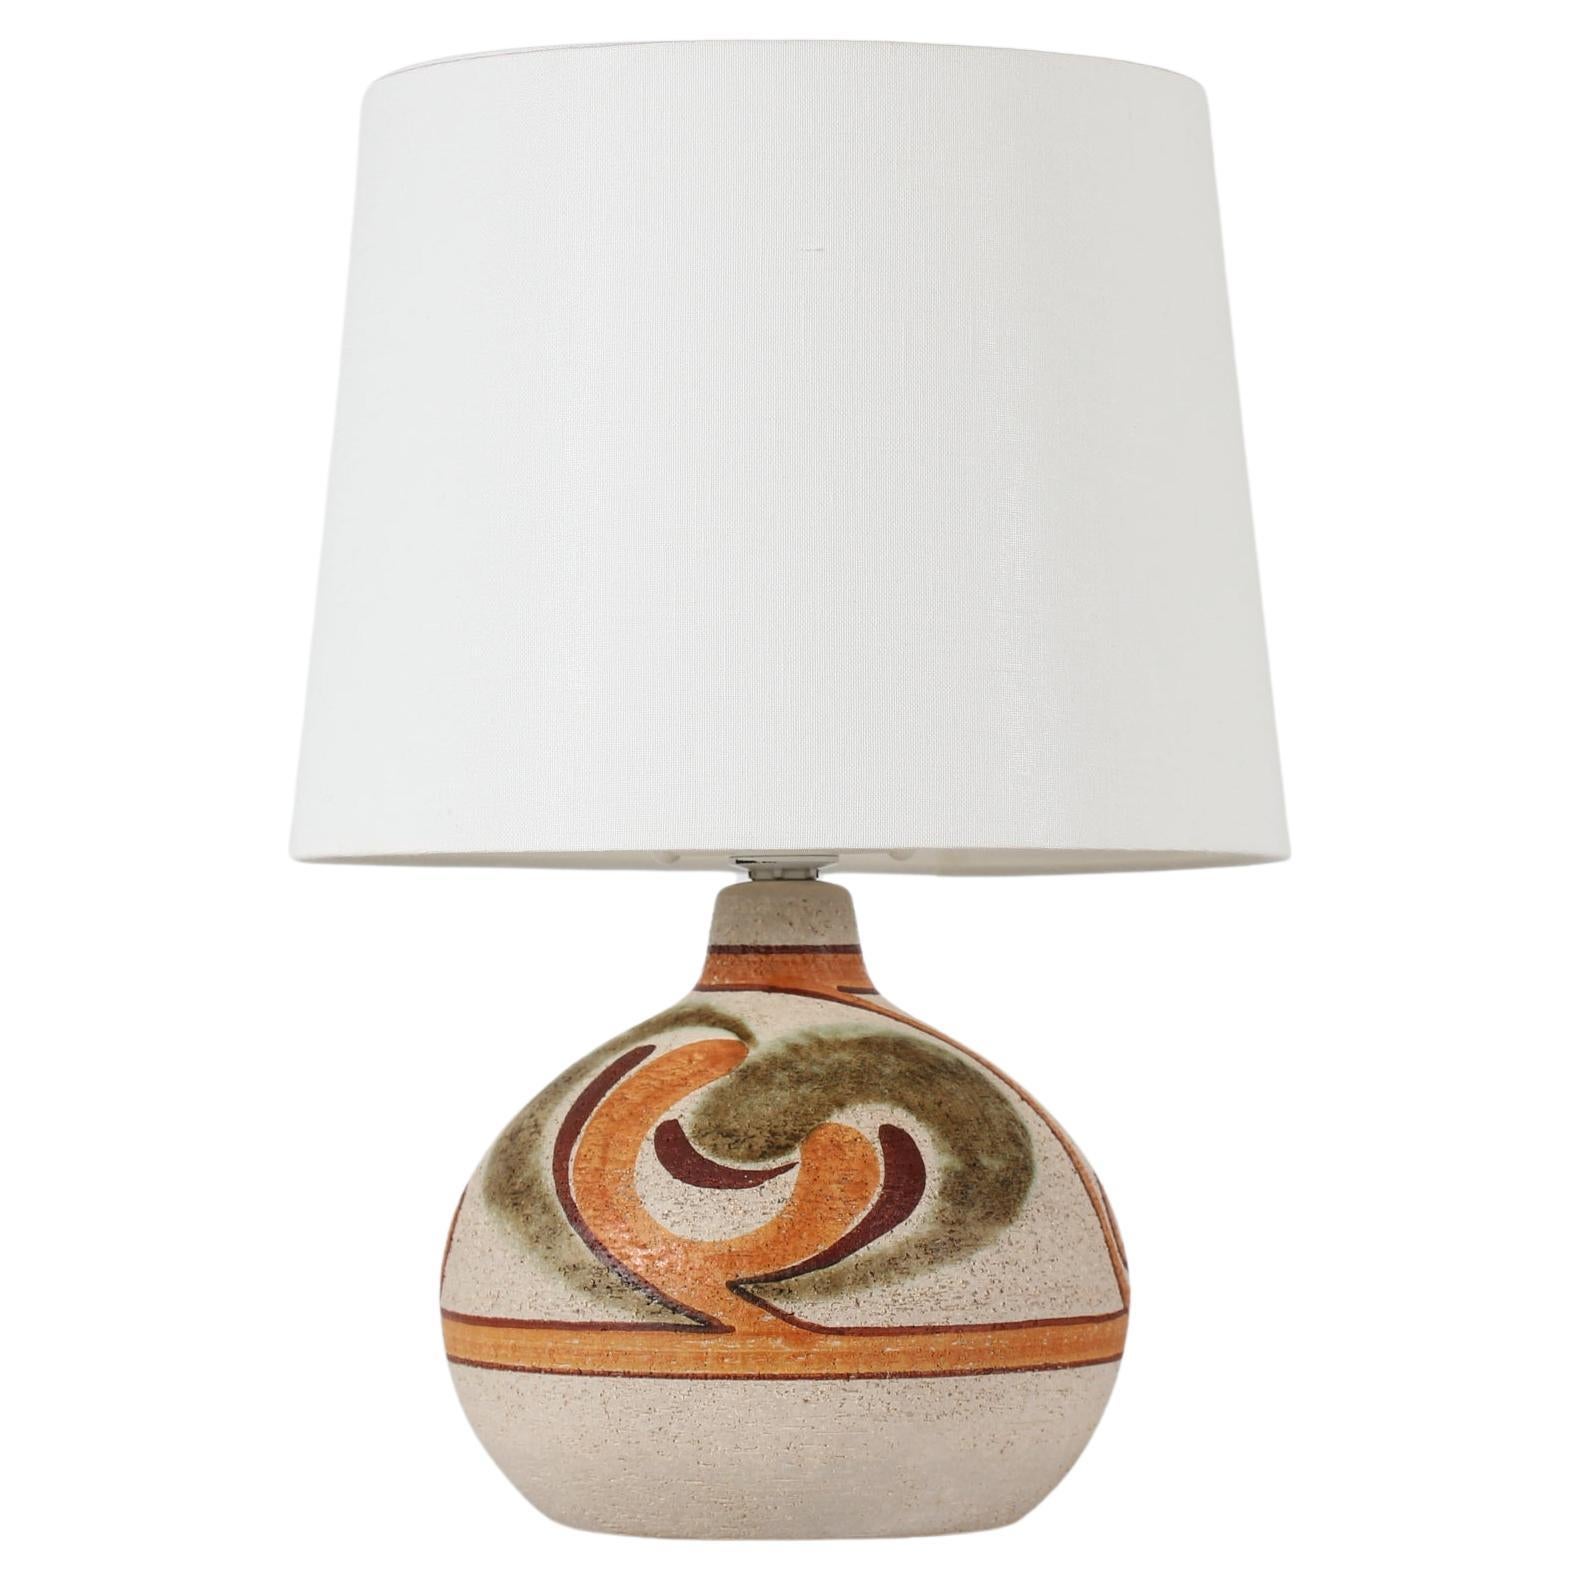 Noomi Backhausen Artistic and Rustic Søholm Stoneware Table Lamp - Denmark 1960s For Sale